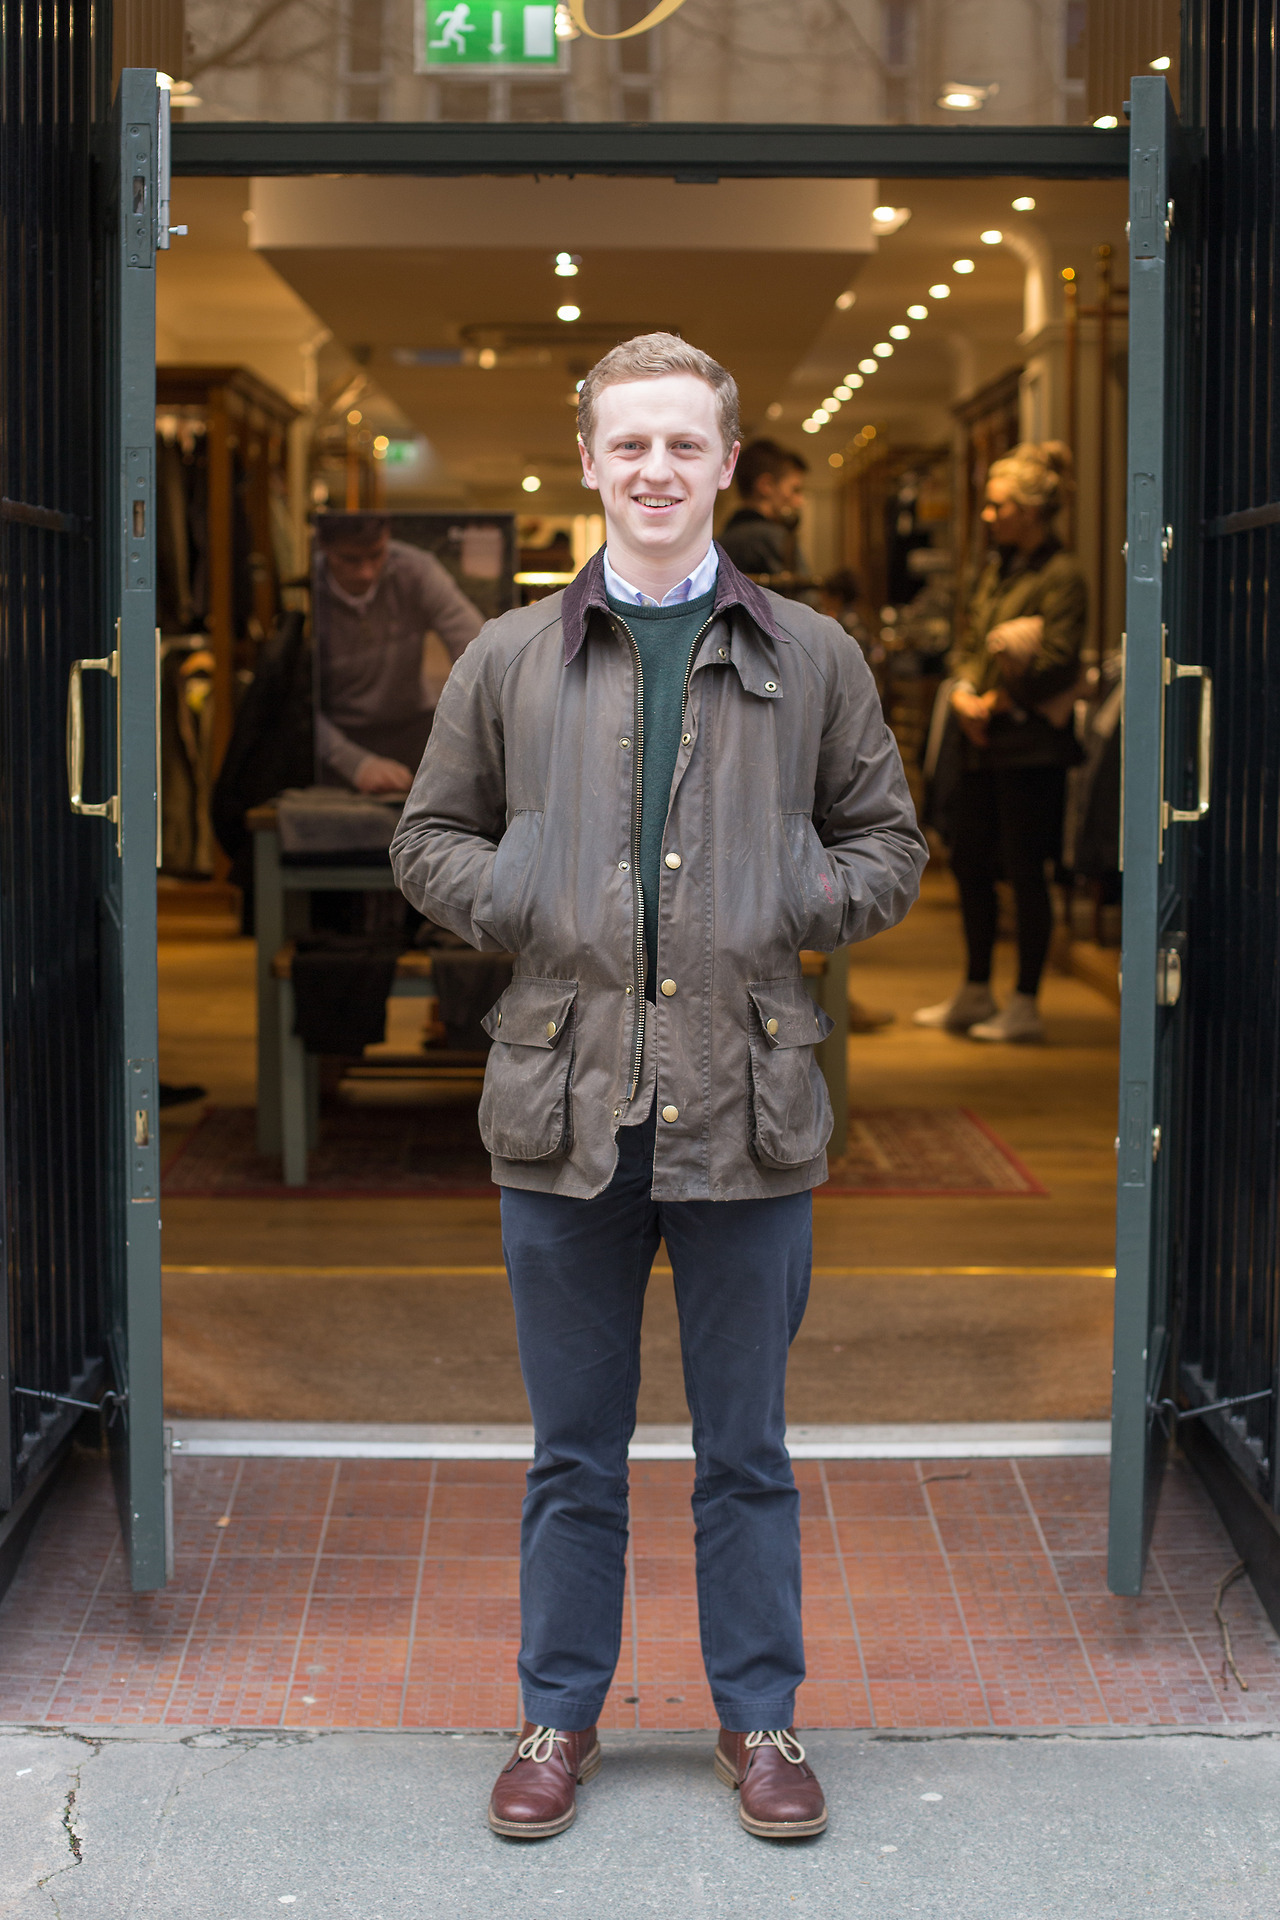 barbour ashby review reddit